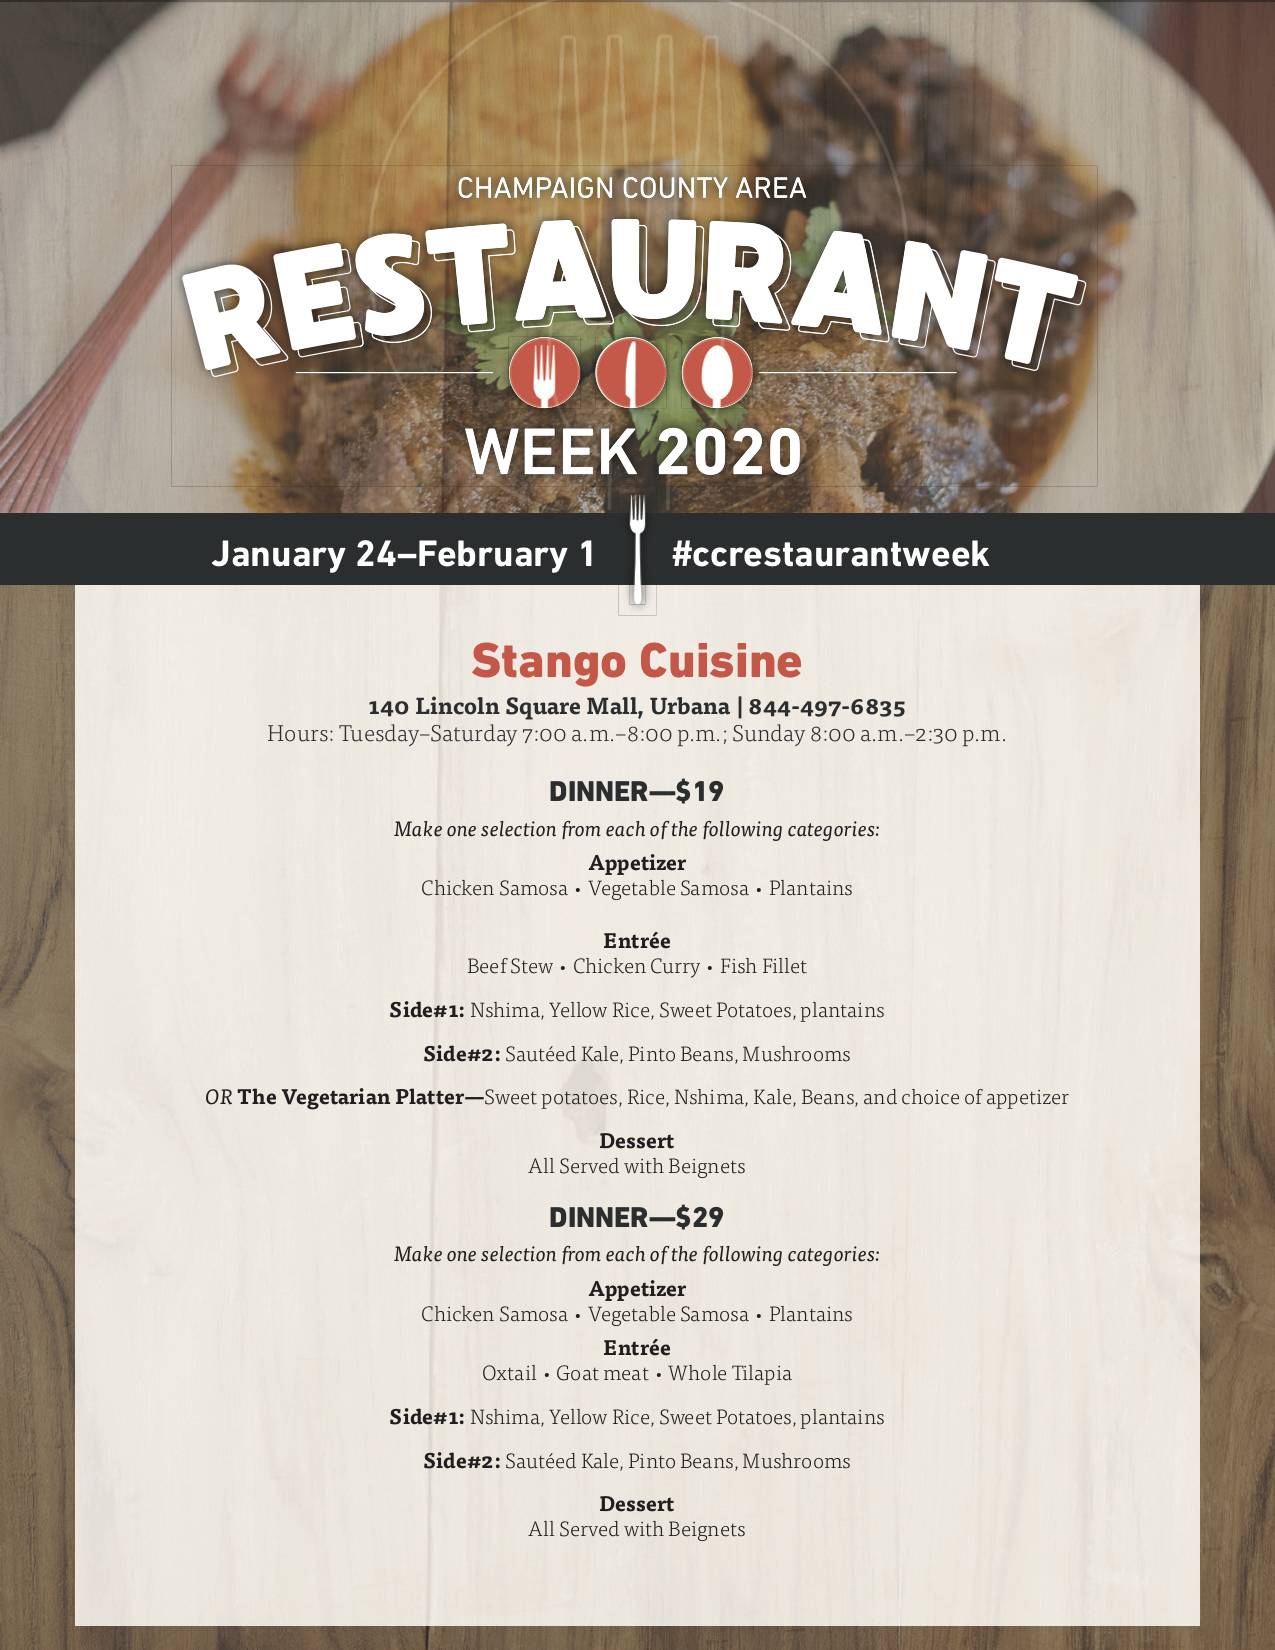 Image: A poster that says Champaign County Area Restaurant Week 2020 at the top. The remainder details the available menu options at the Stango Cuisine during Restaurant Week. Image from Visit Champaign County.